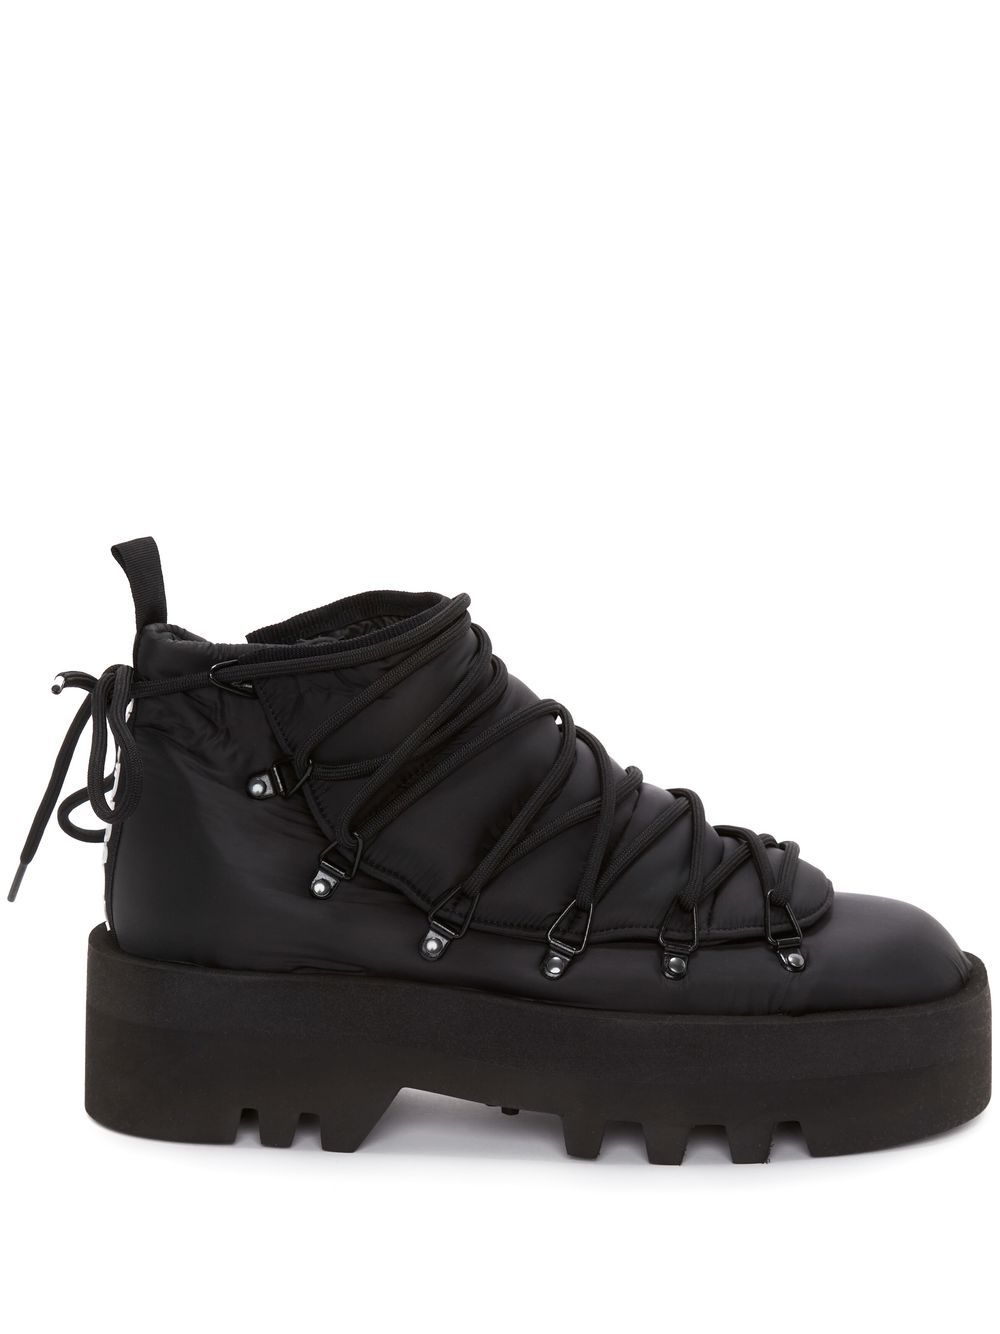 JW Anderson Padded lace-up Boots - Farfetch